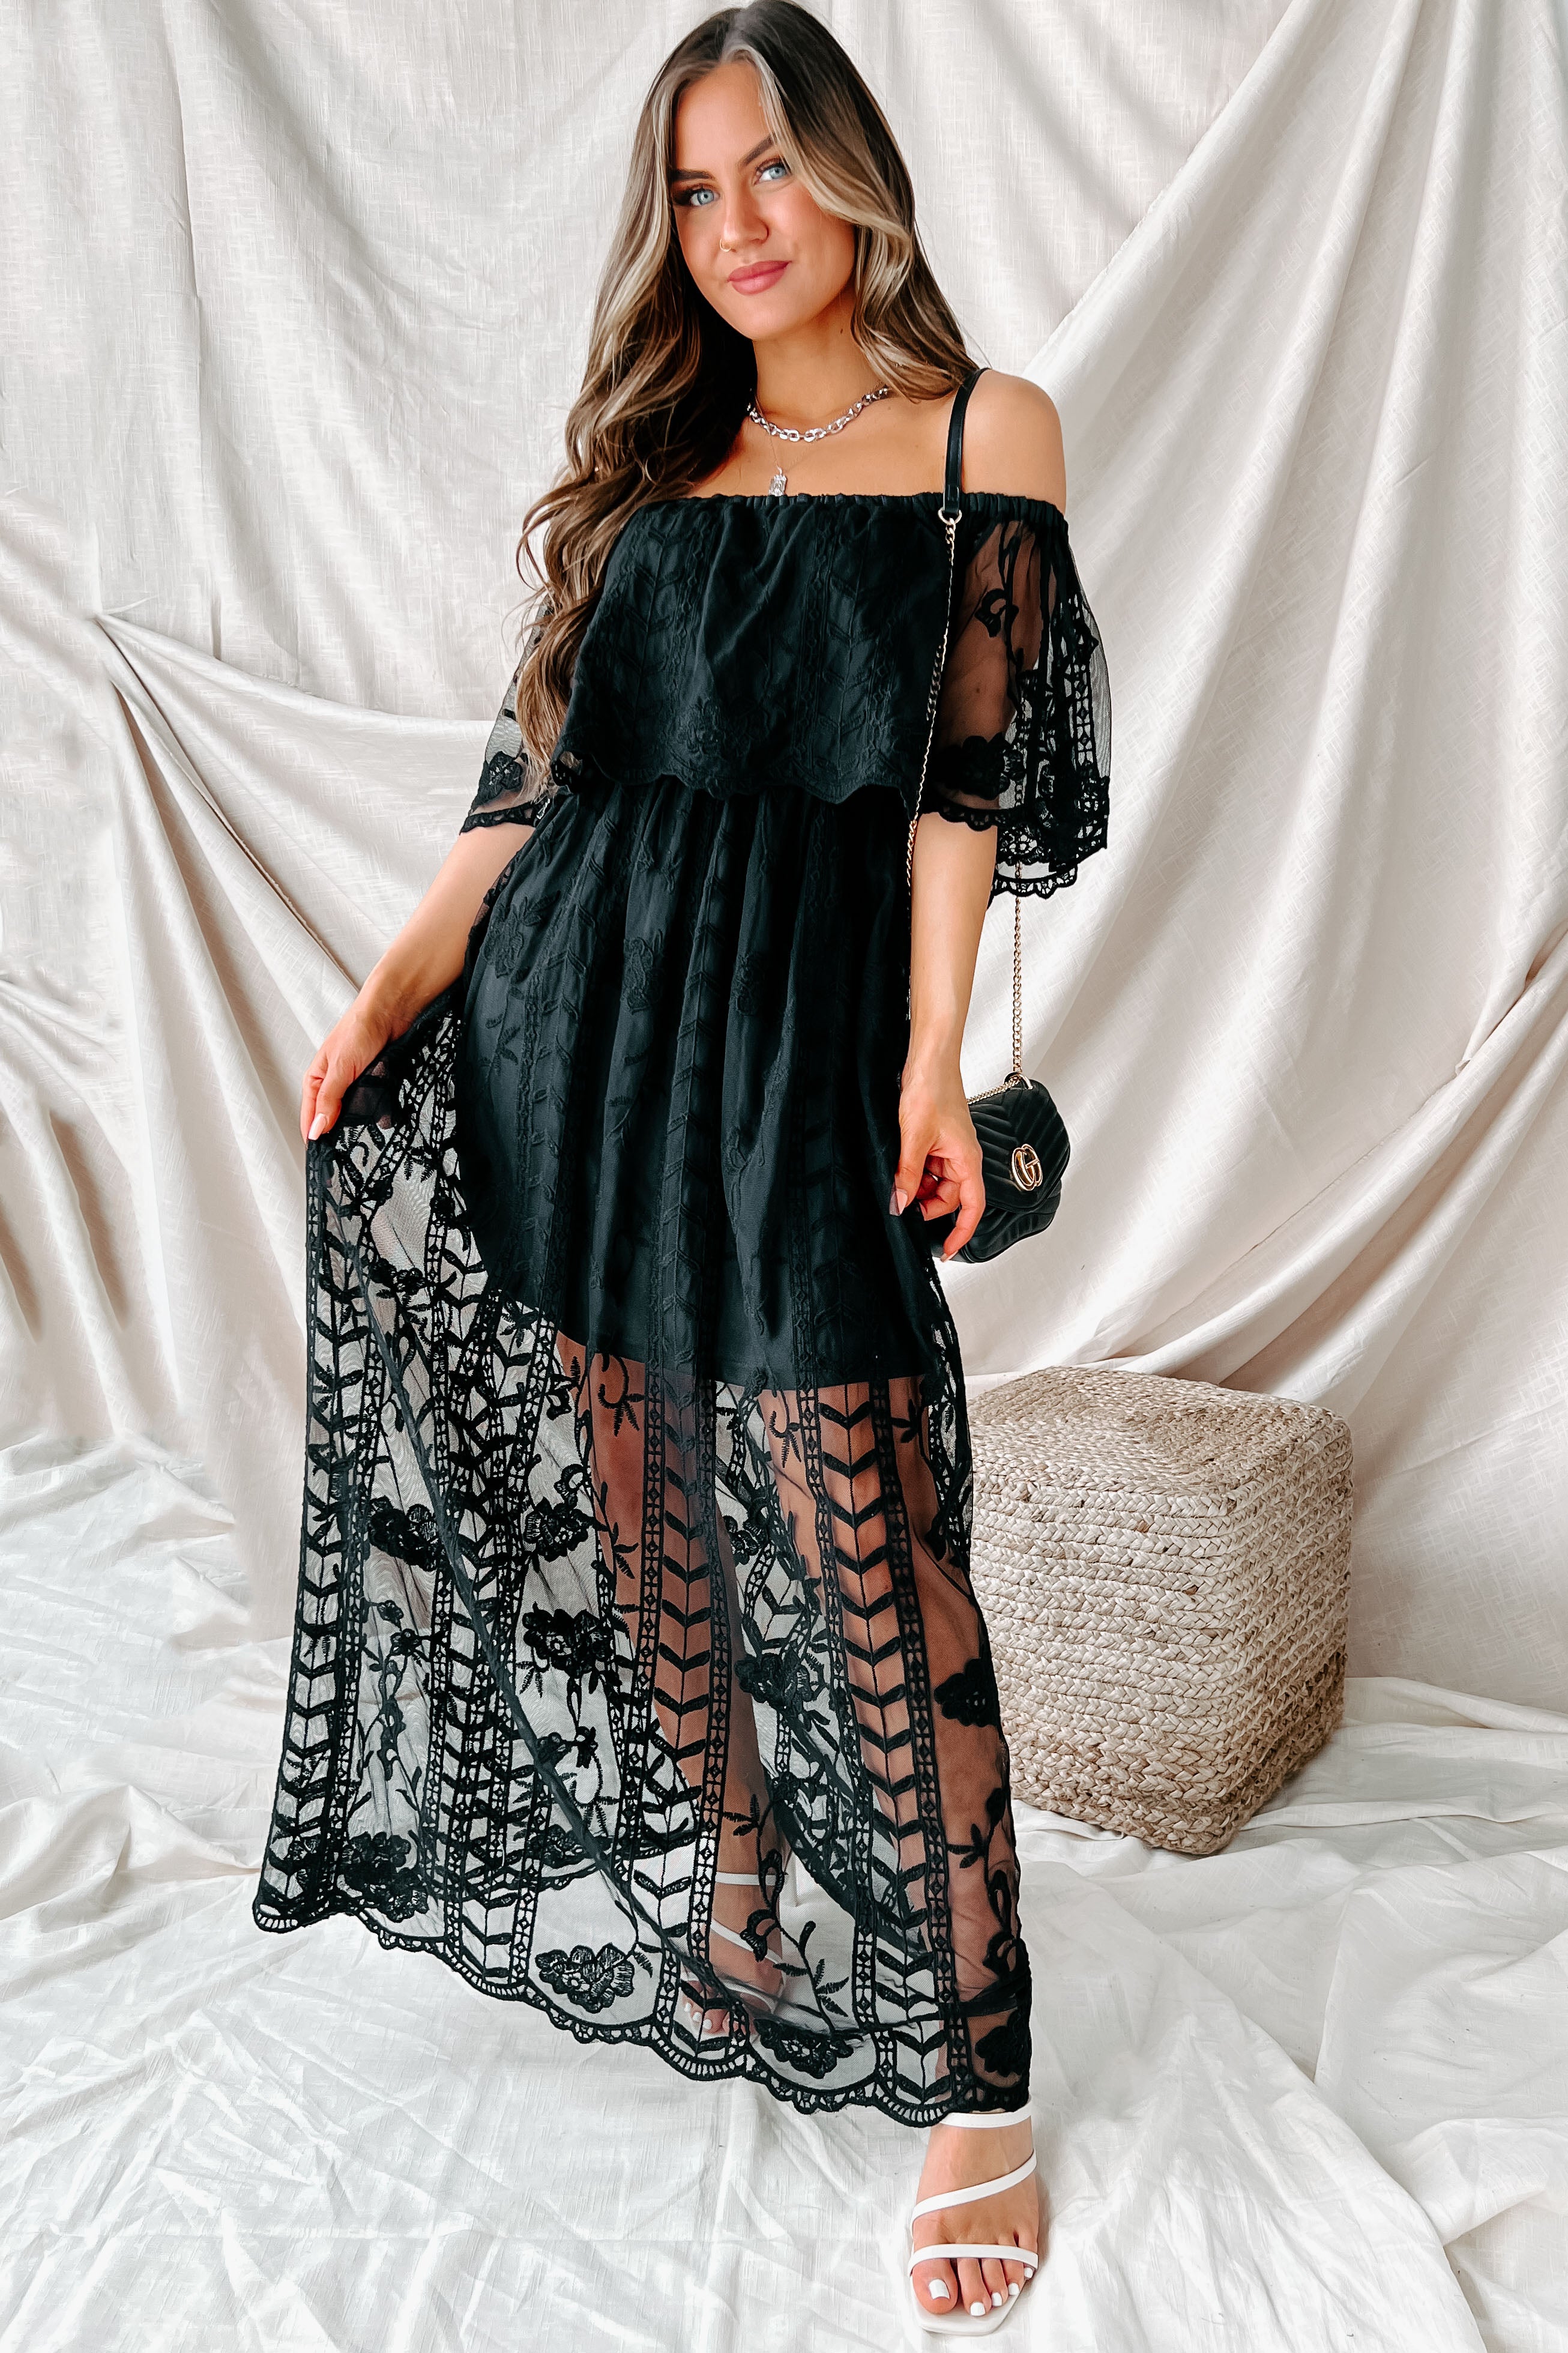 A Peek Behind the Lace Maxi Slip in Black